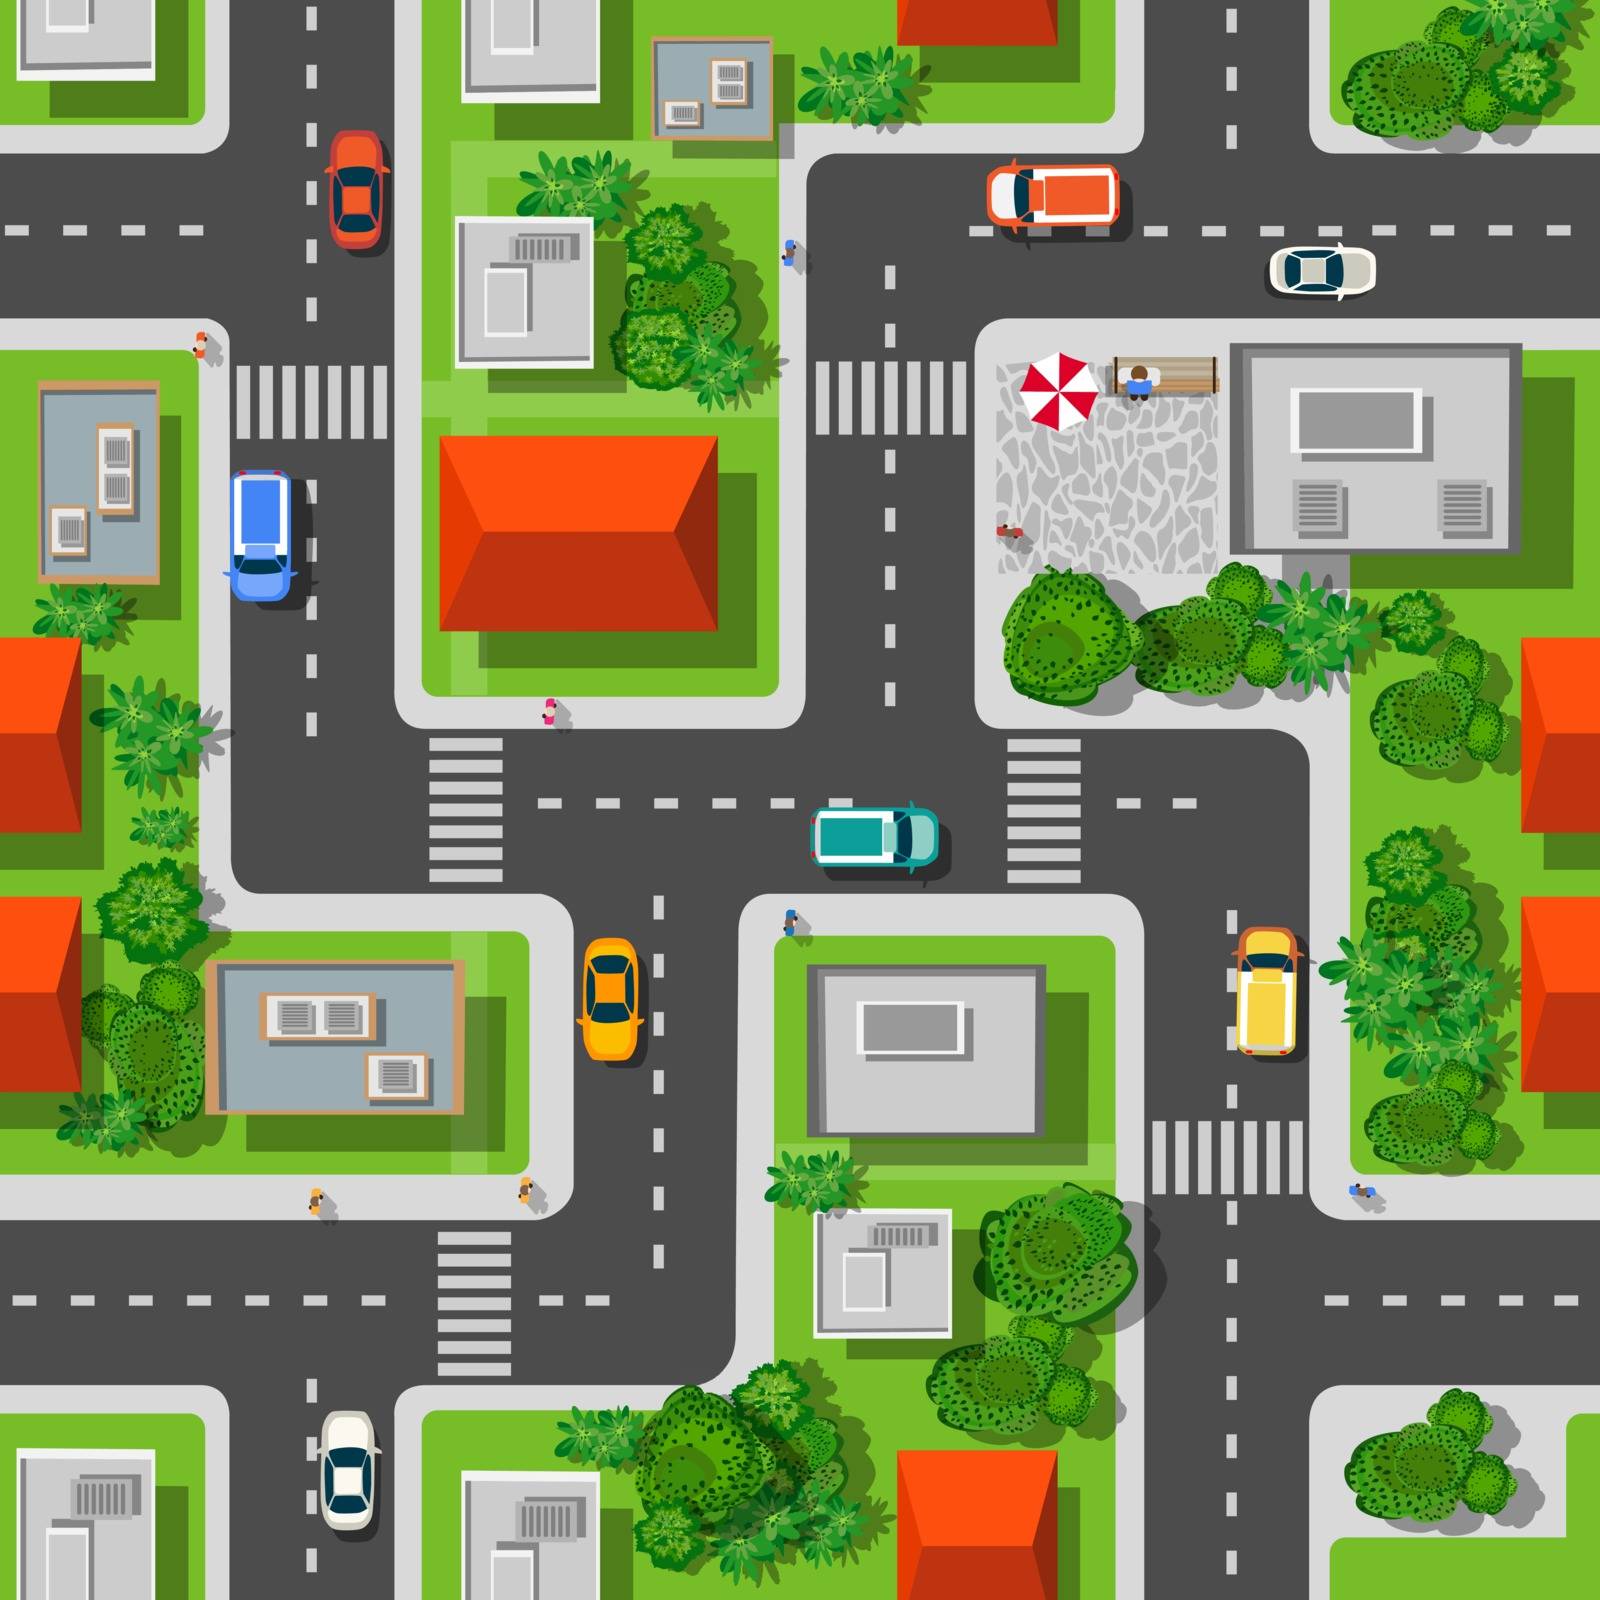 Top view of the city seamless pattern of streets, roads, houses, and cars